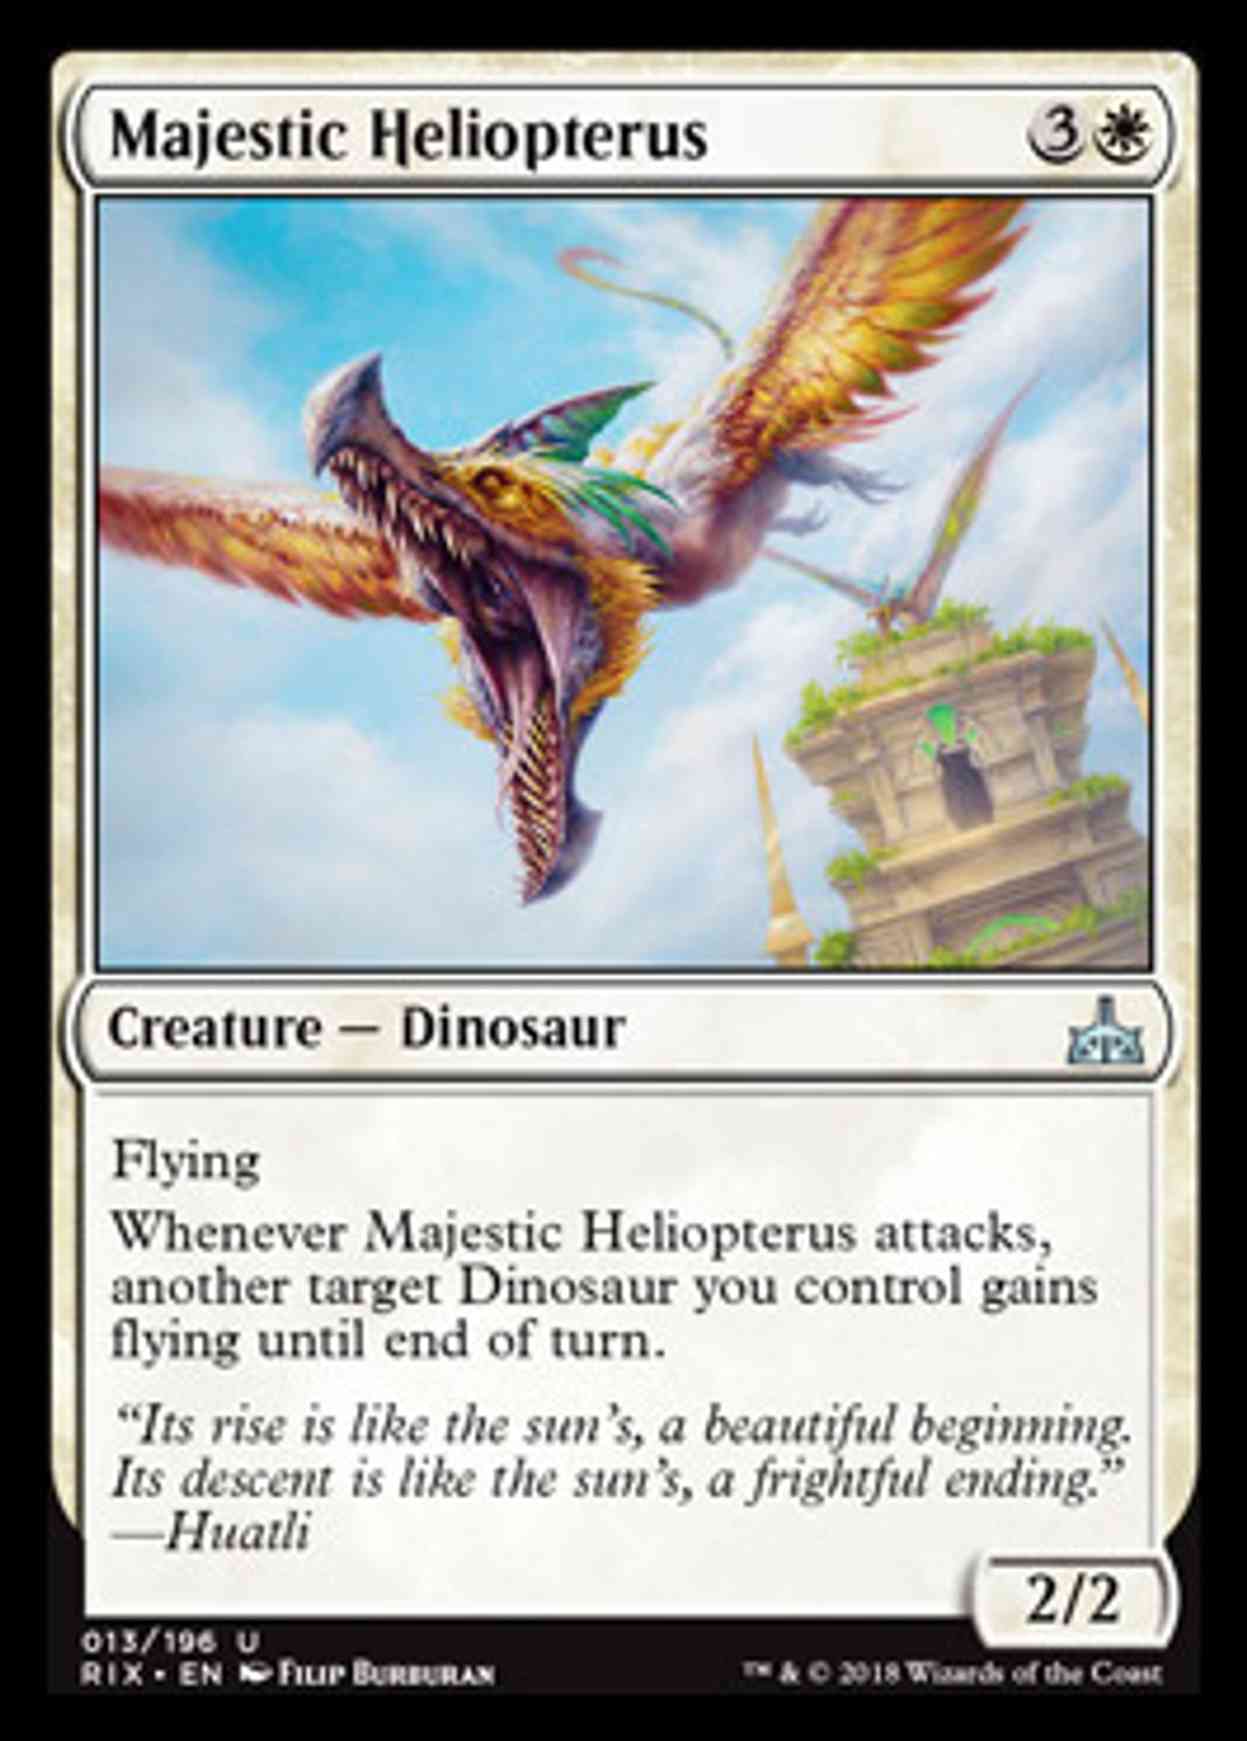 Majestic Heliopterus magic card front